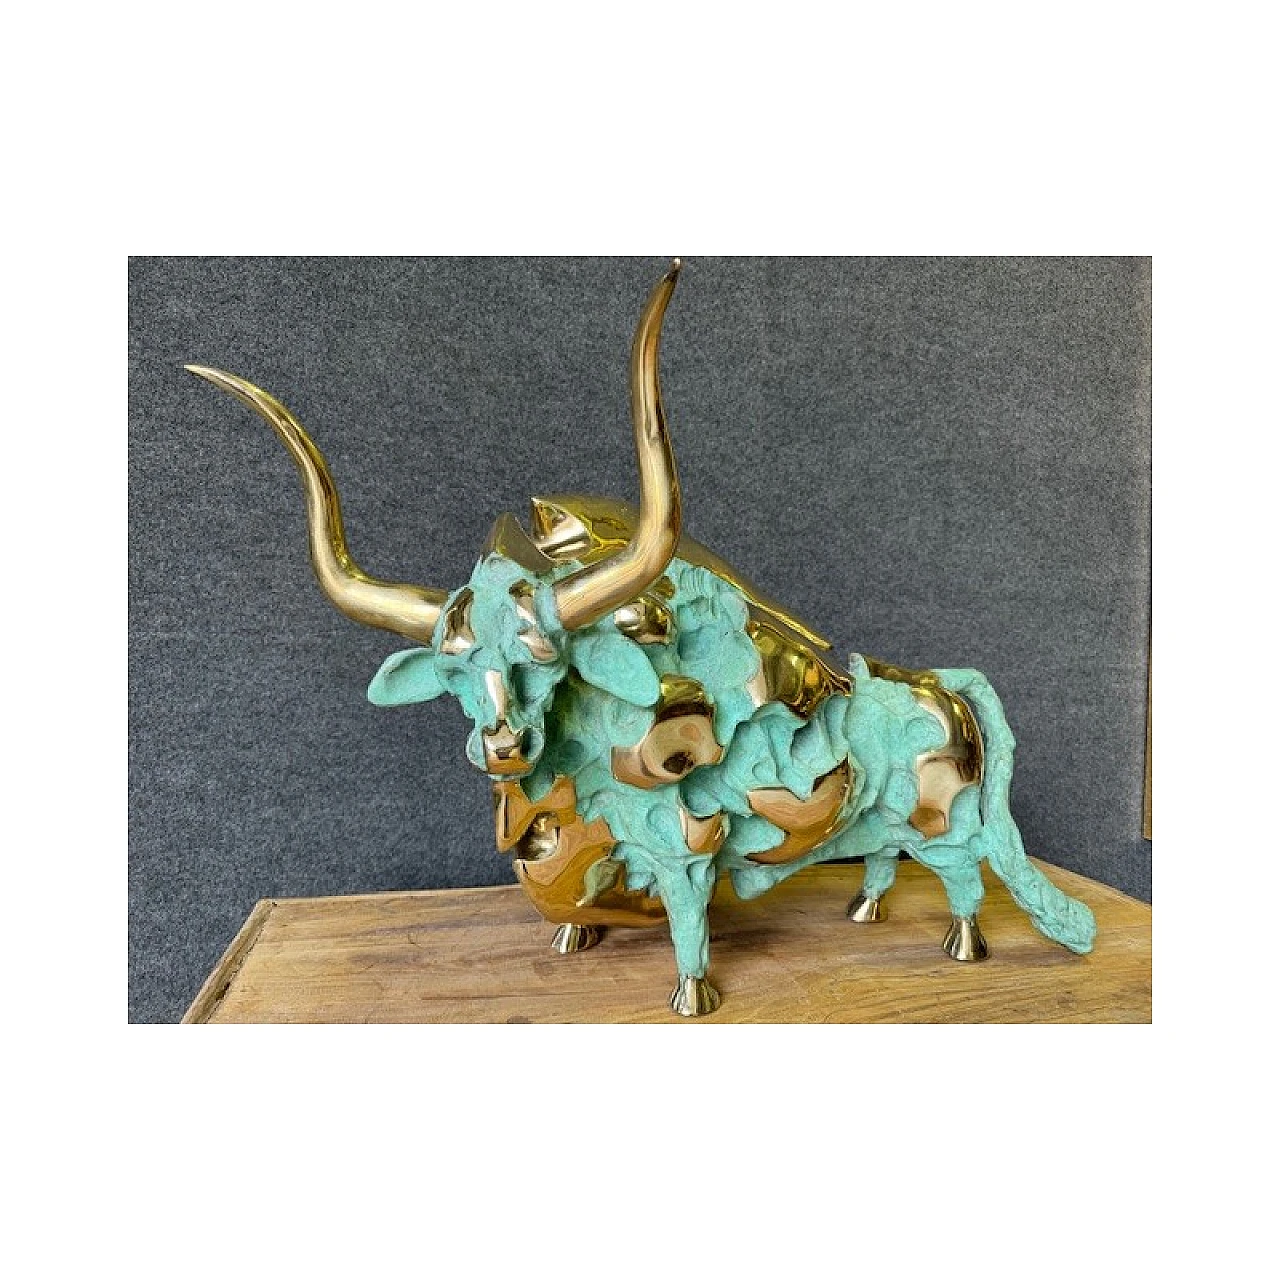 Oxidized and polished bronze bull sculpture 1